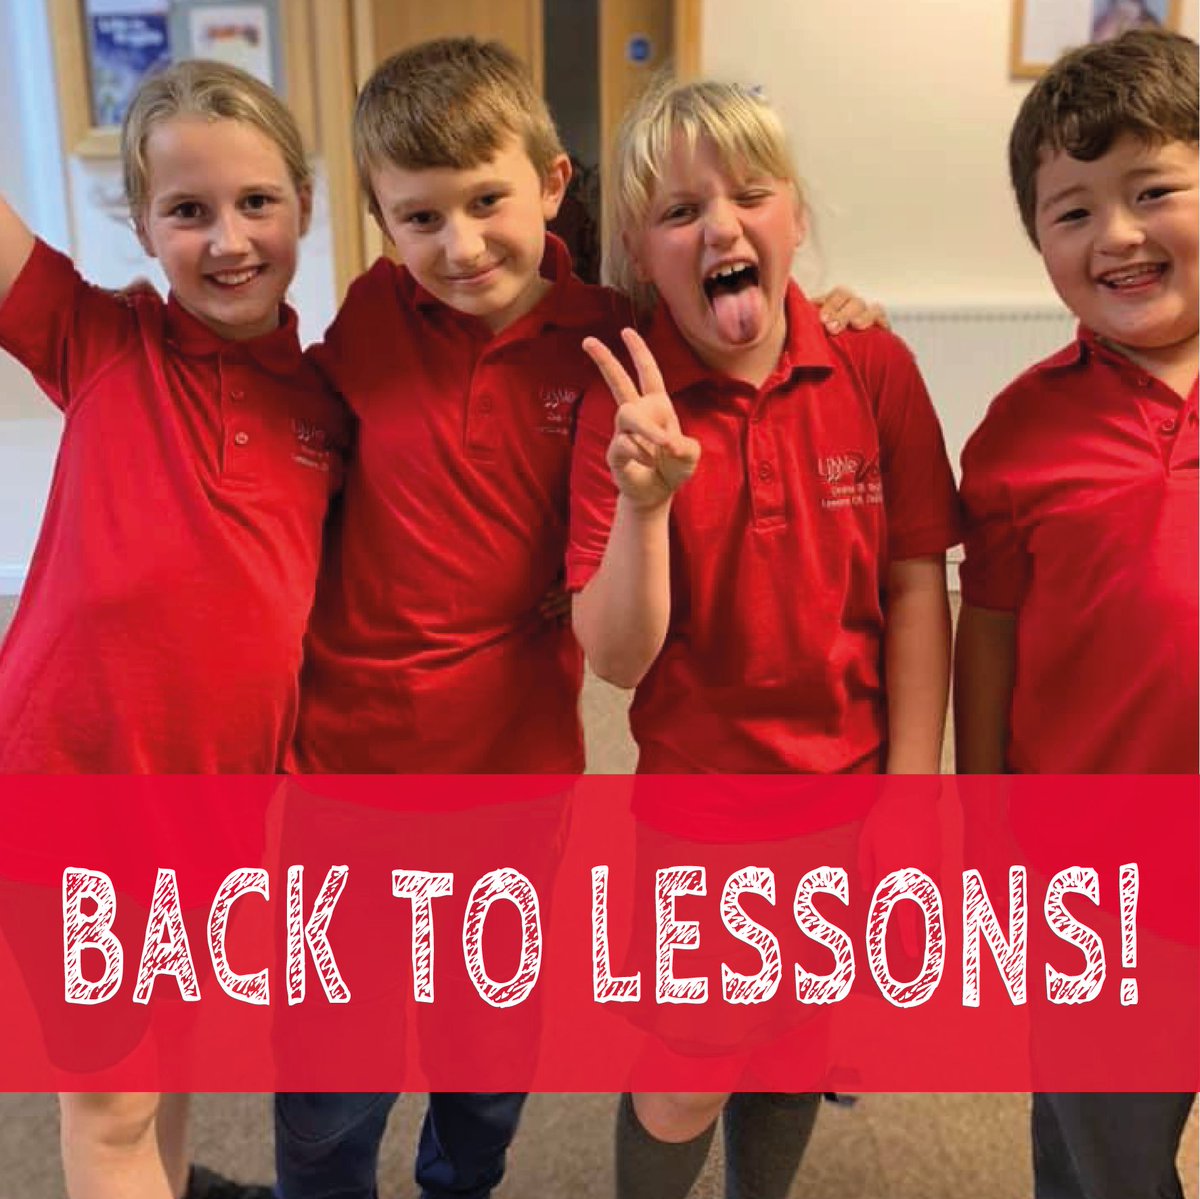 ⭐️BACK TO LESSONS THIS WEEK 
❤️ I’m so excited to see all the children again! 
😊 Also looking forward to welcoming new children!
🚀 This year promises to be bigger and better - I can’t wait to BLAST OFF 💥

#narborough #singinglessons #aylestone #kirbymuxloe #dramaclasses #LAMDA